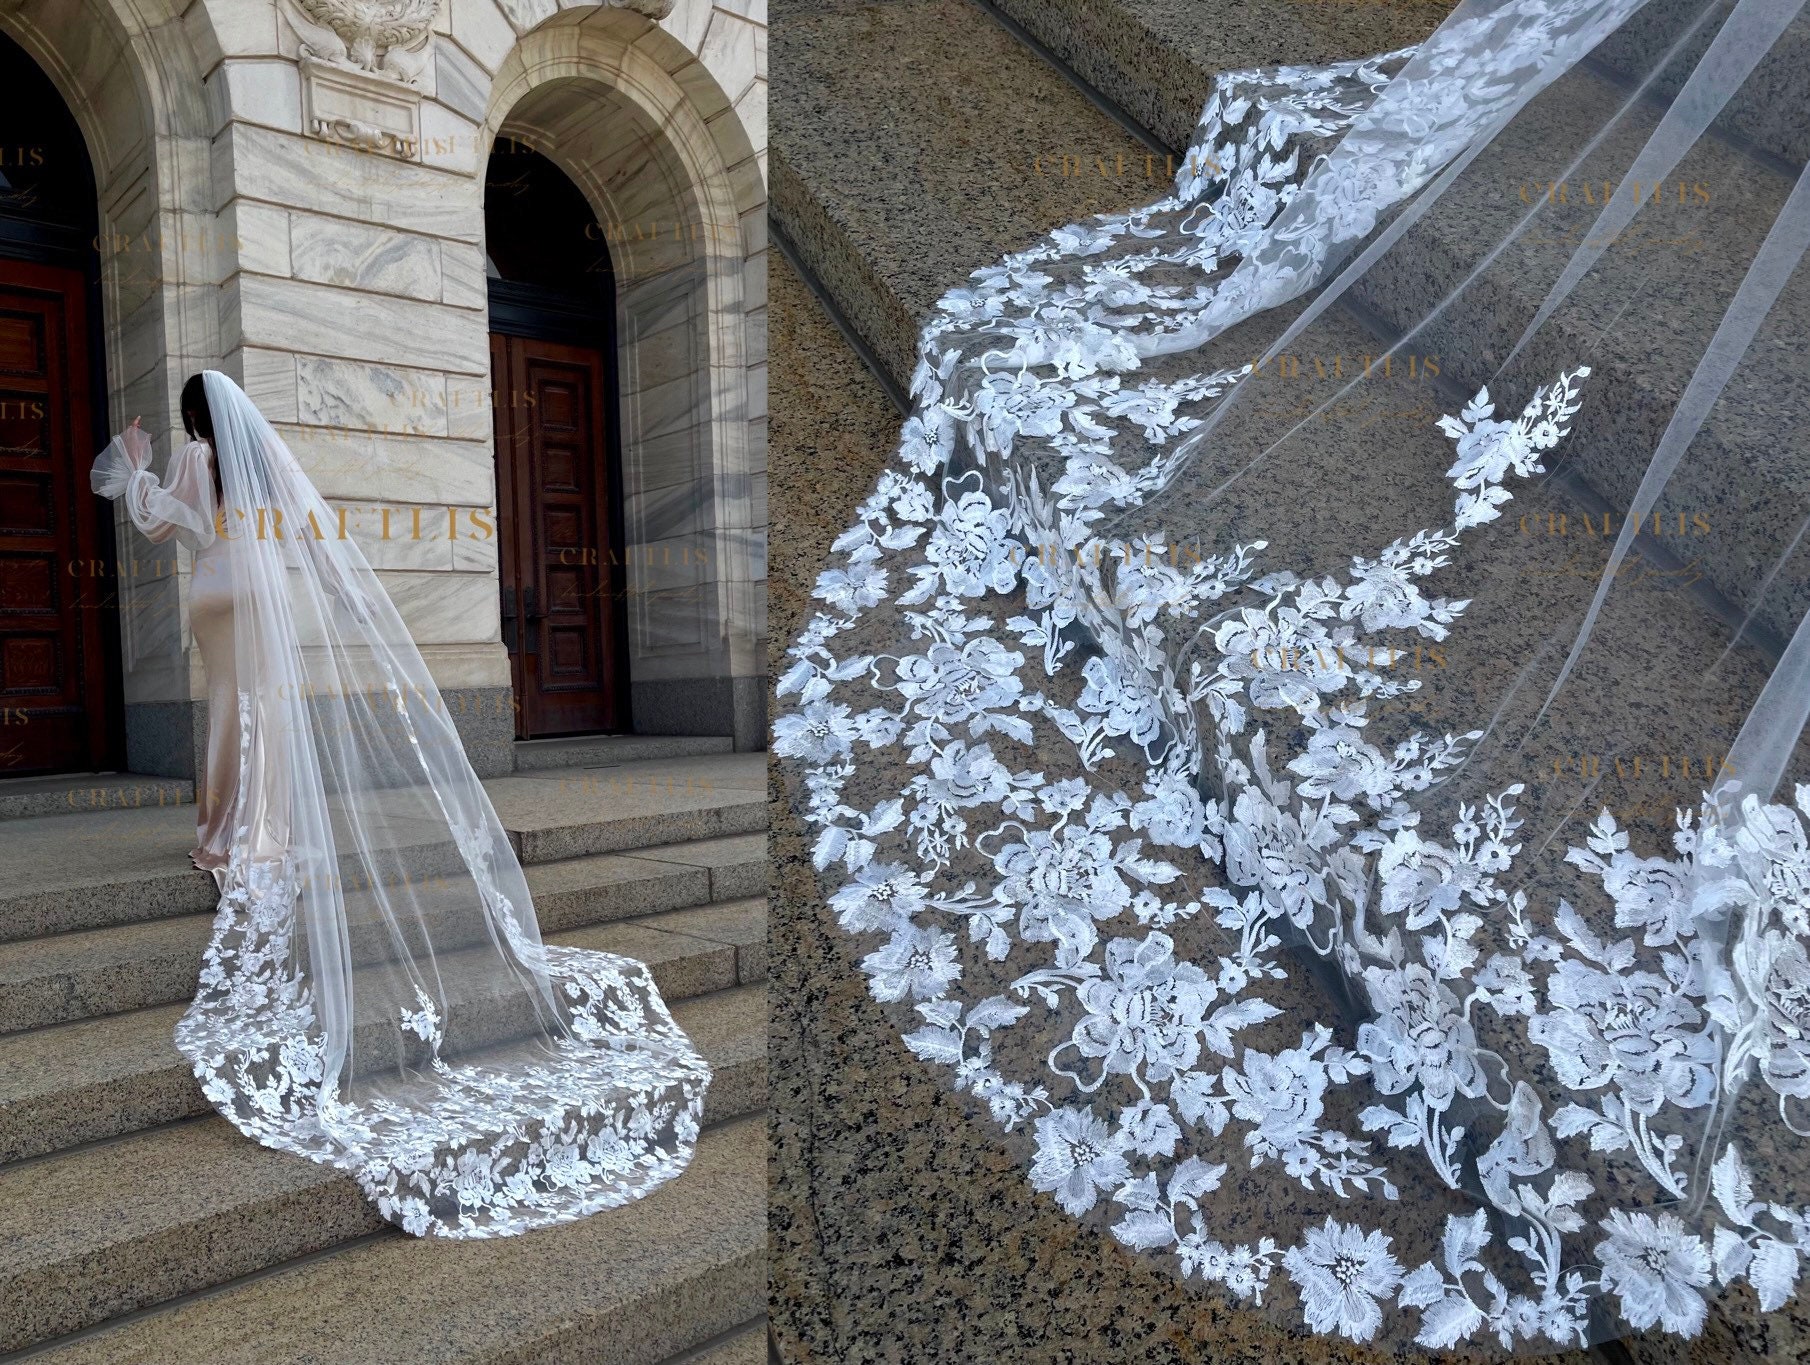 3D Bridal Floral Veil Elegant Cathedral Style Colour Veil Trailing with Comb